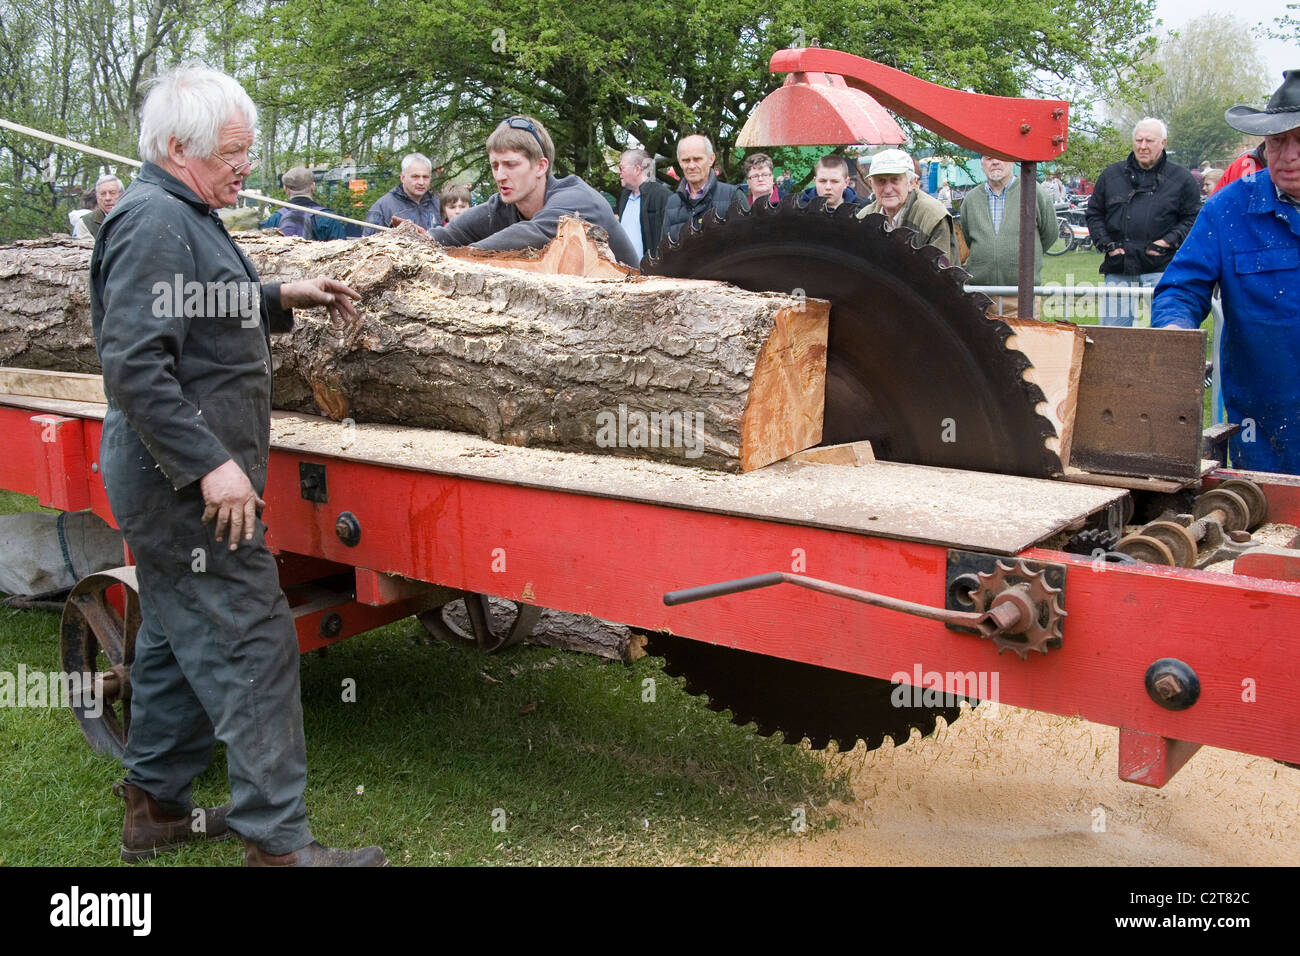 Men demonstrating the Cutting of wood with Tractor driven Rack Saw   Old Working Farm Machinery Stock Photo